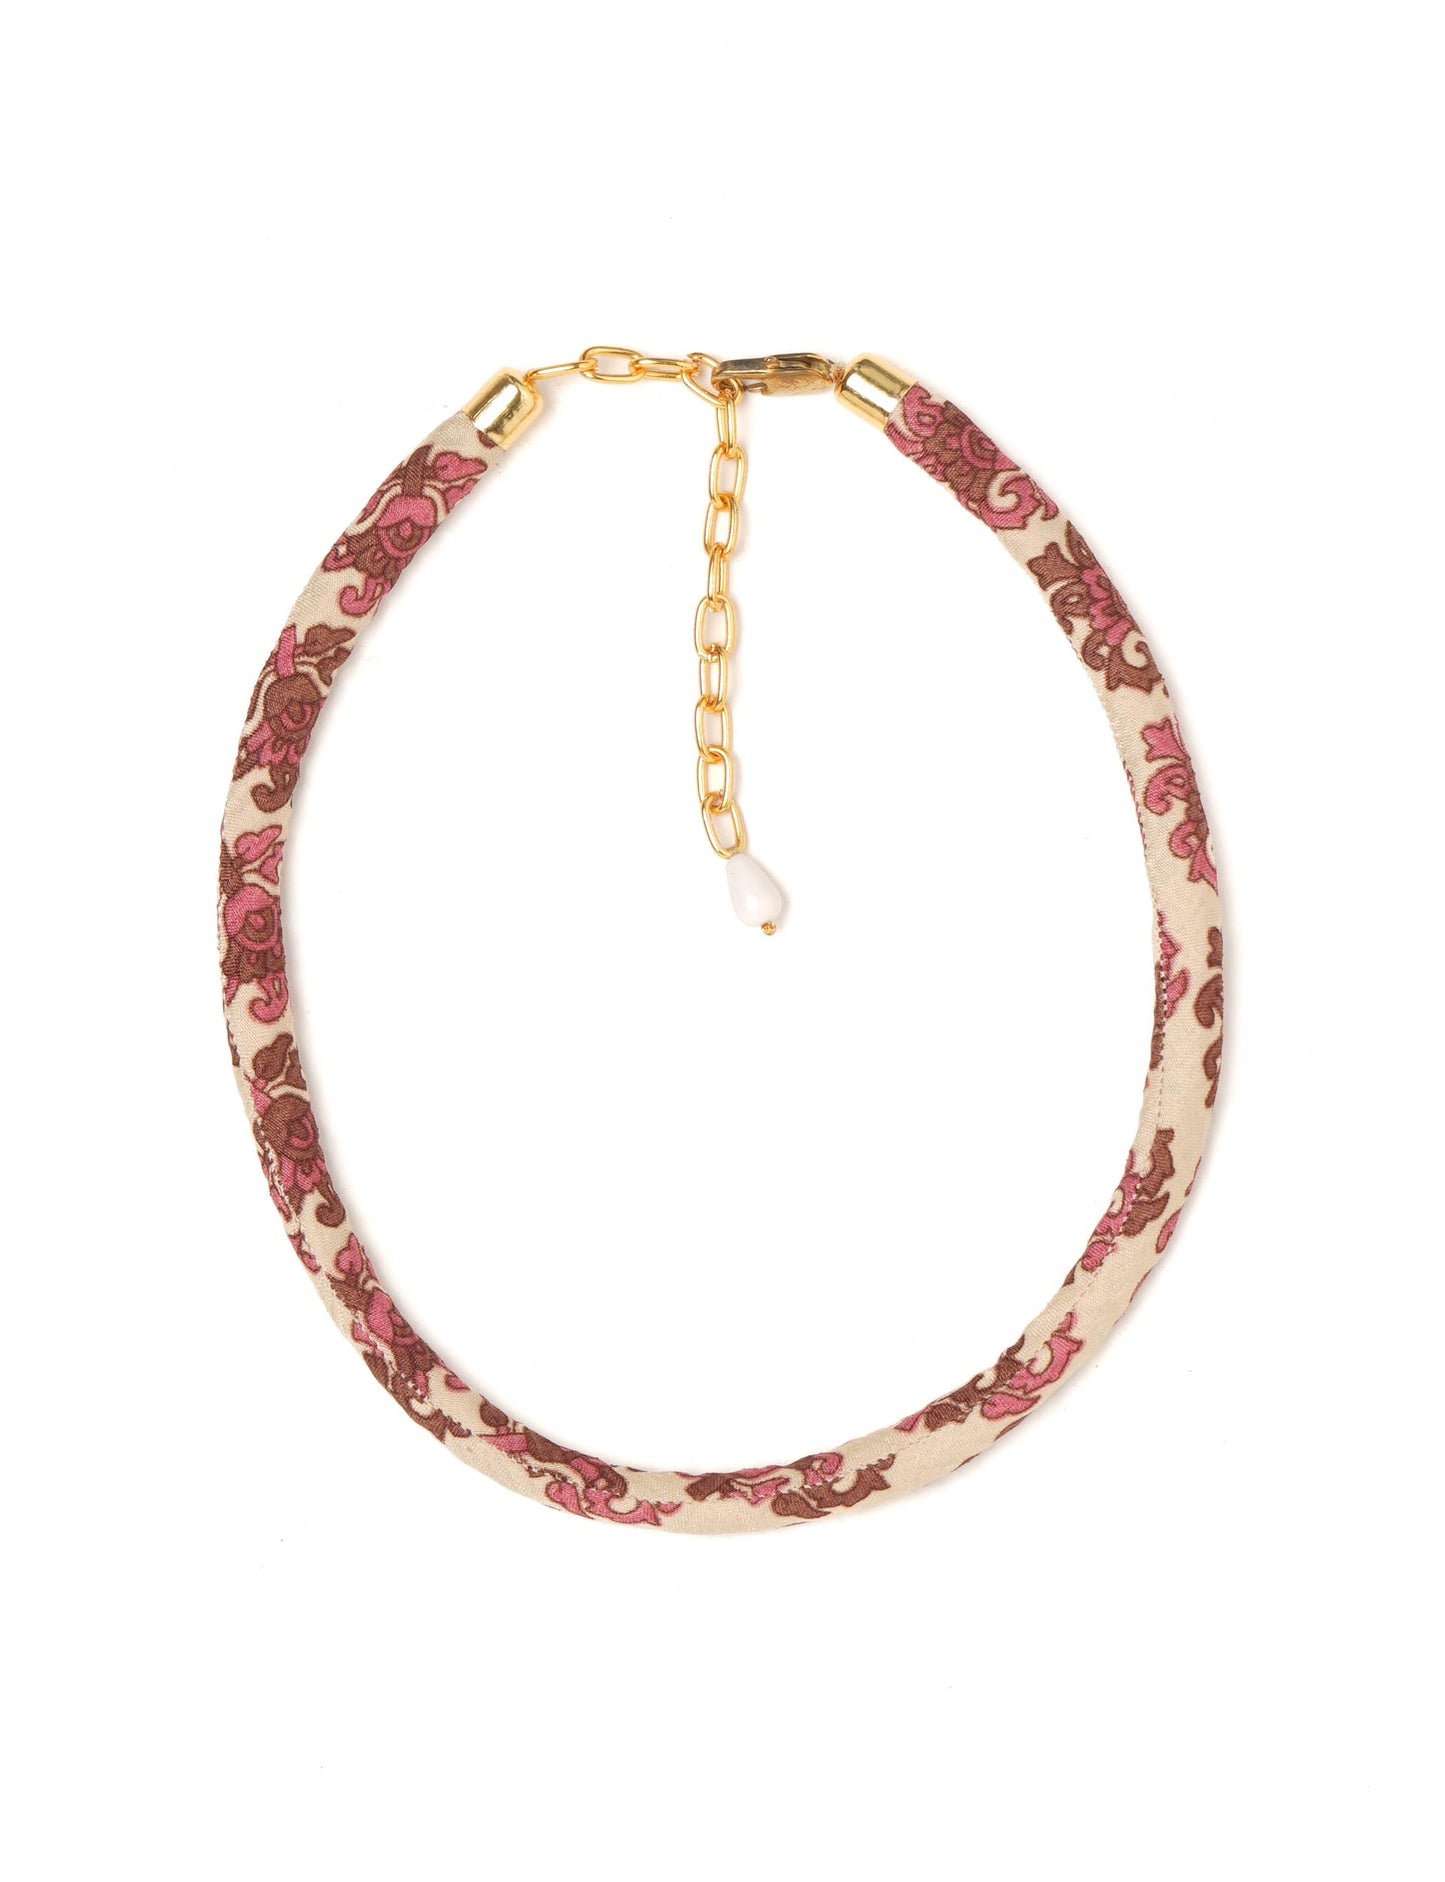 Elevate your look sustainably with our Rope Necklace. Crafted using cotton rope hand-wrapped with pre-loved Indian saris, this necklace is a testament to ethical and green fashion. Make a conscious choice for a brighter, eco-friendly future with this unique, upcycled accessory.